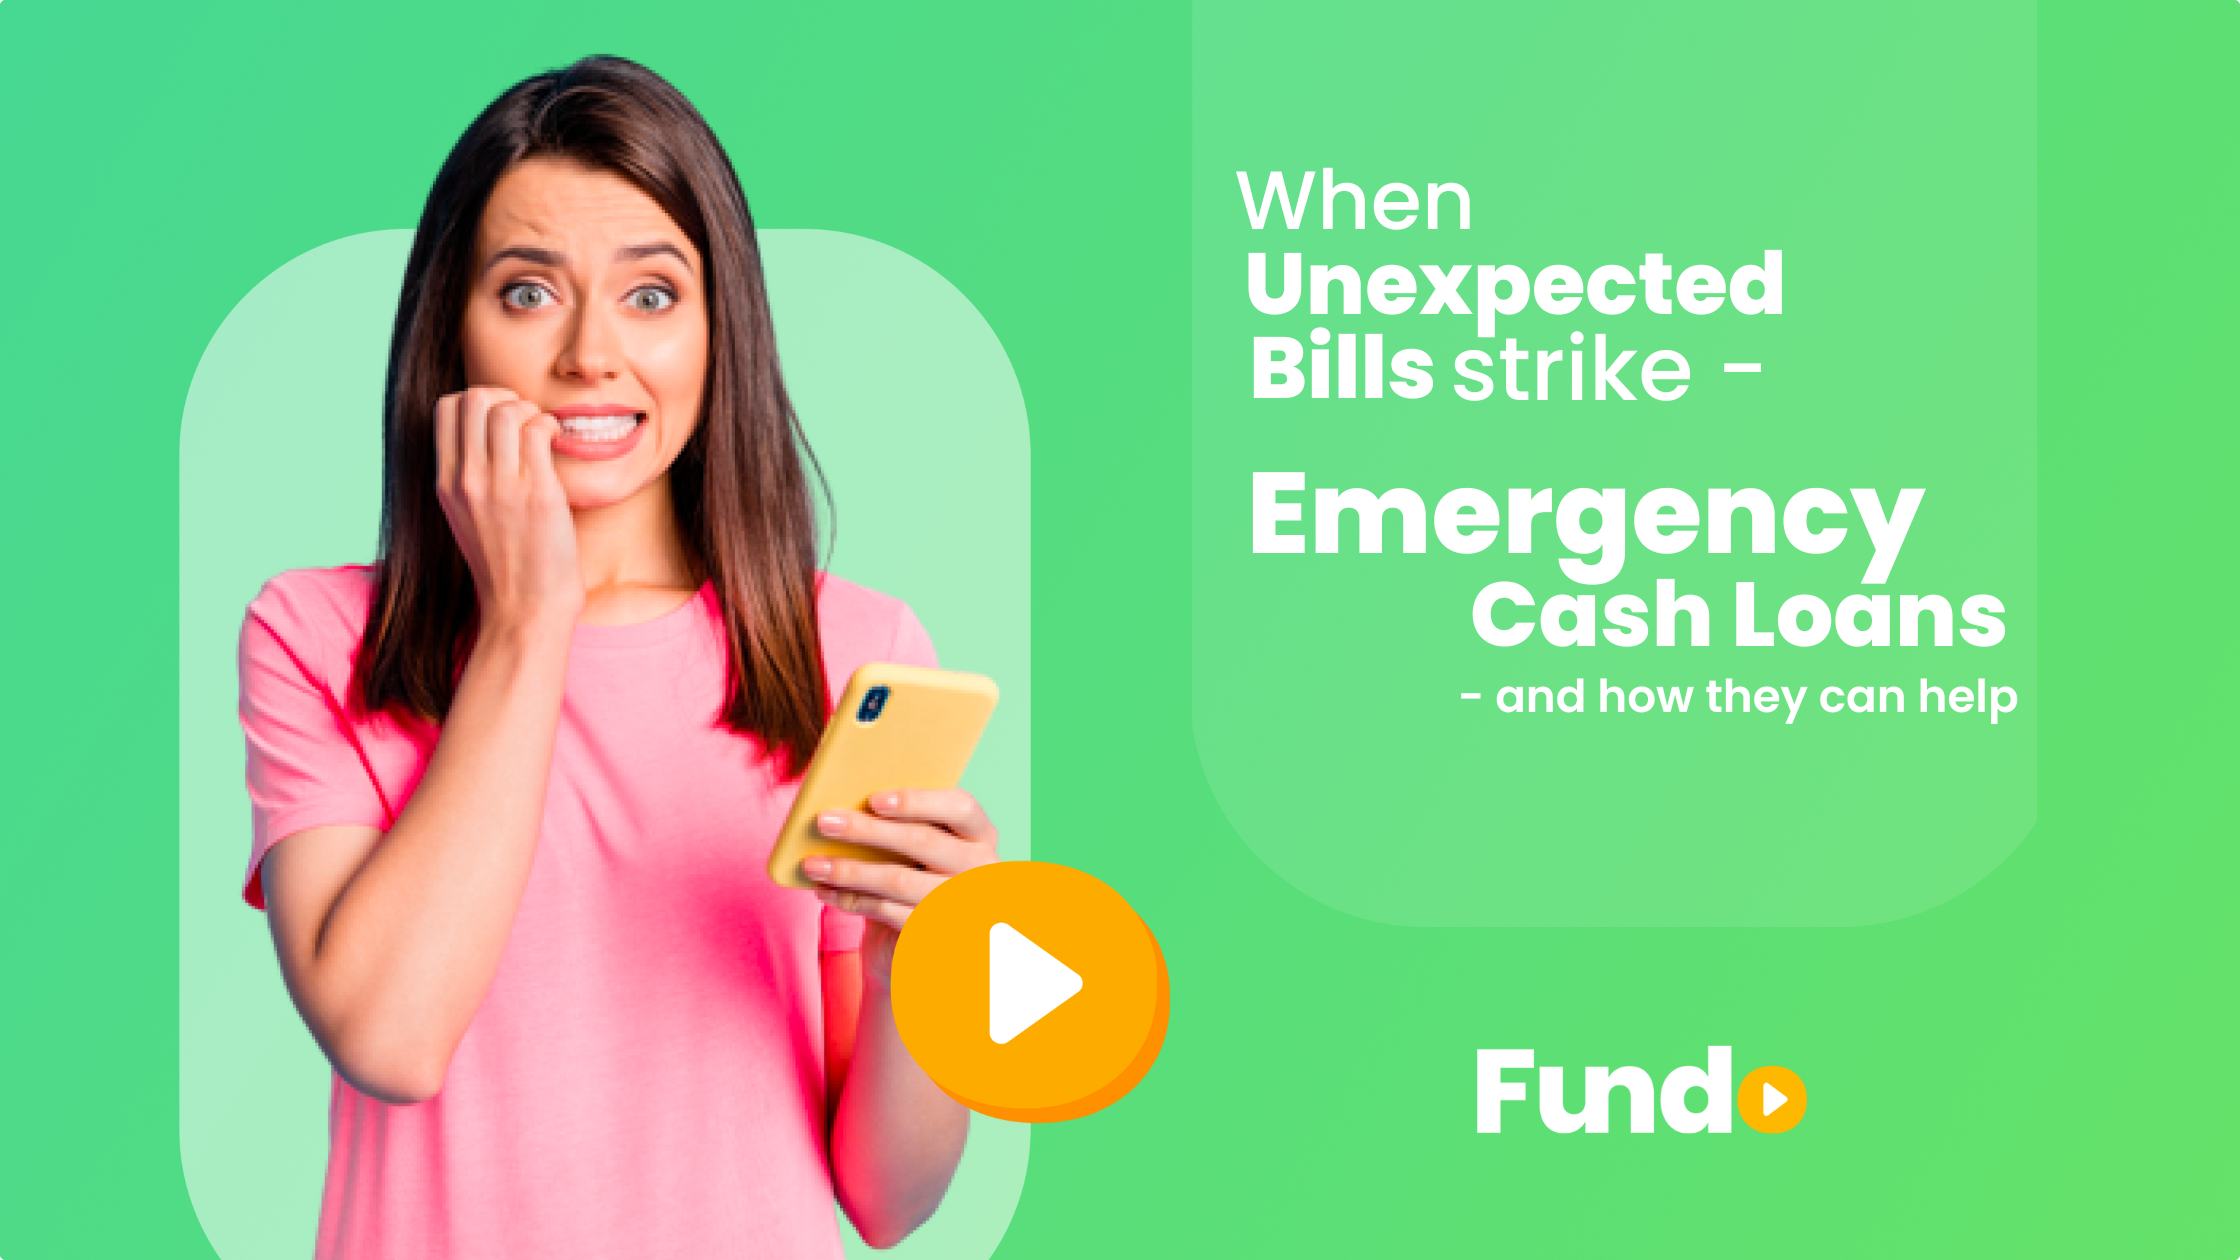 Need an Emergency Cash Loan for an unexpected bill?